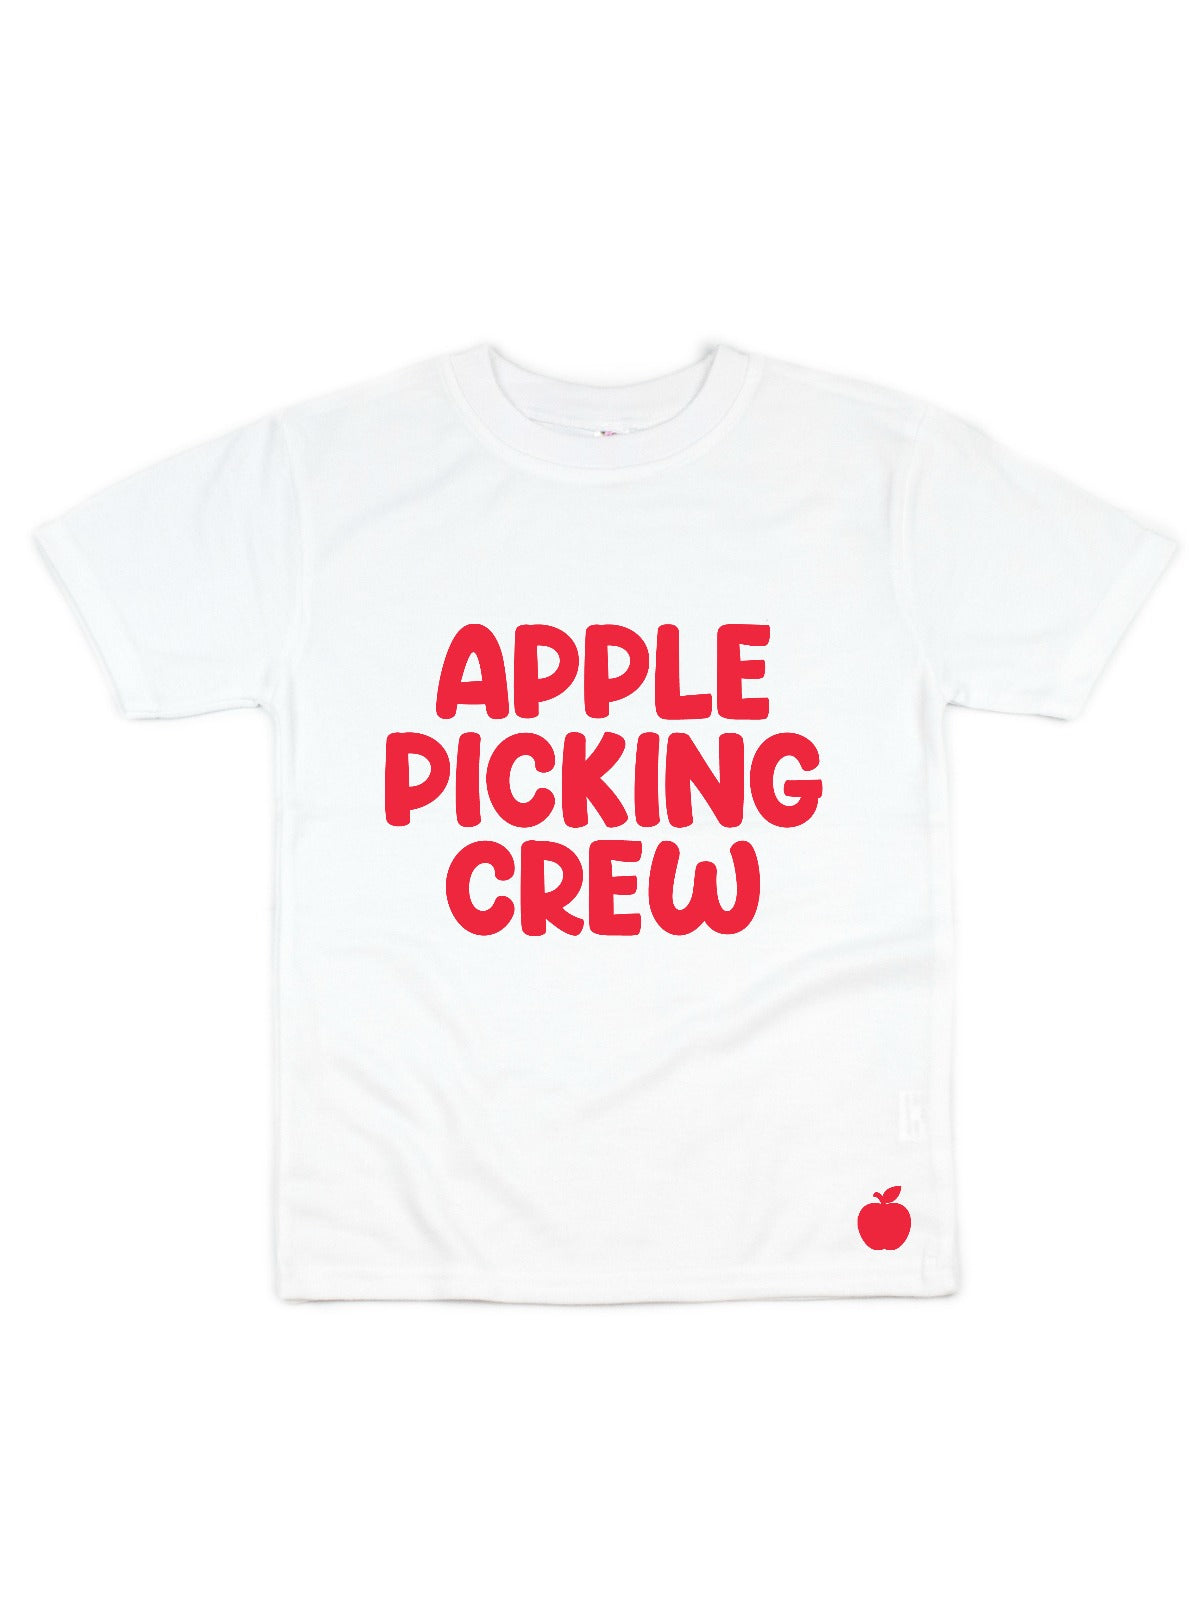 apple picking crew kids fall shirts white and red